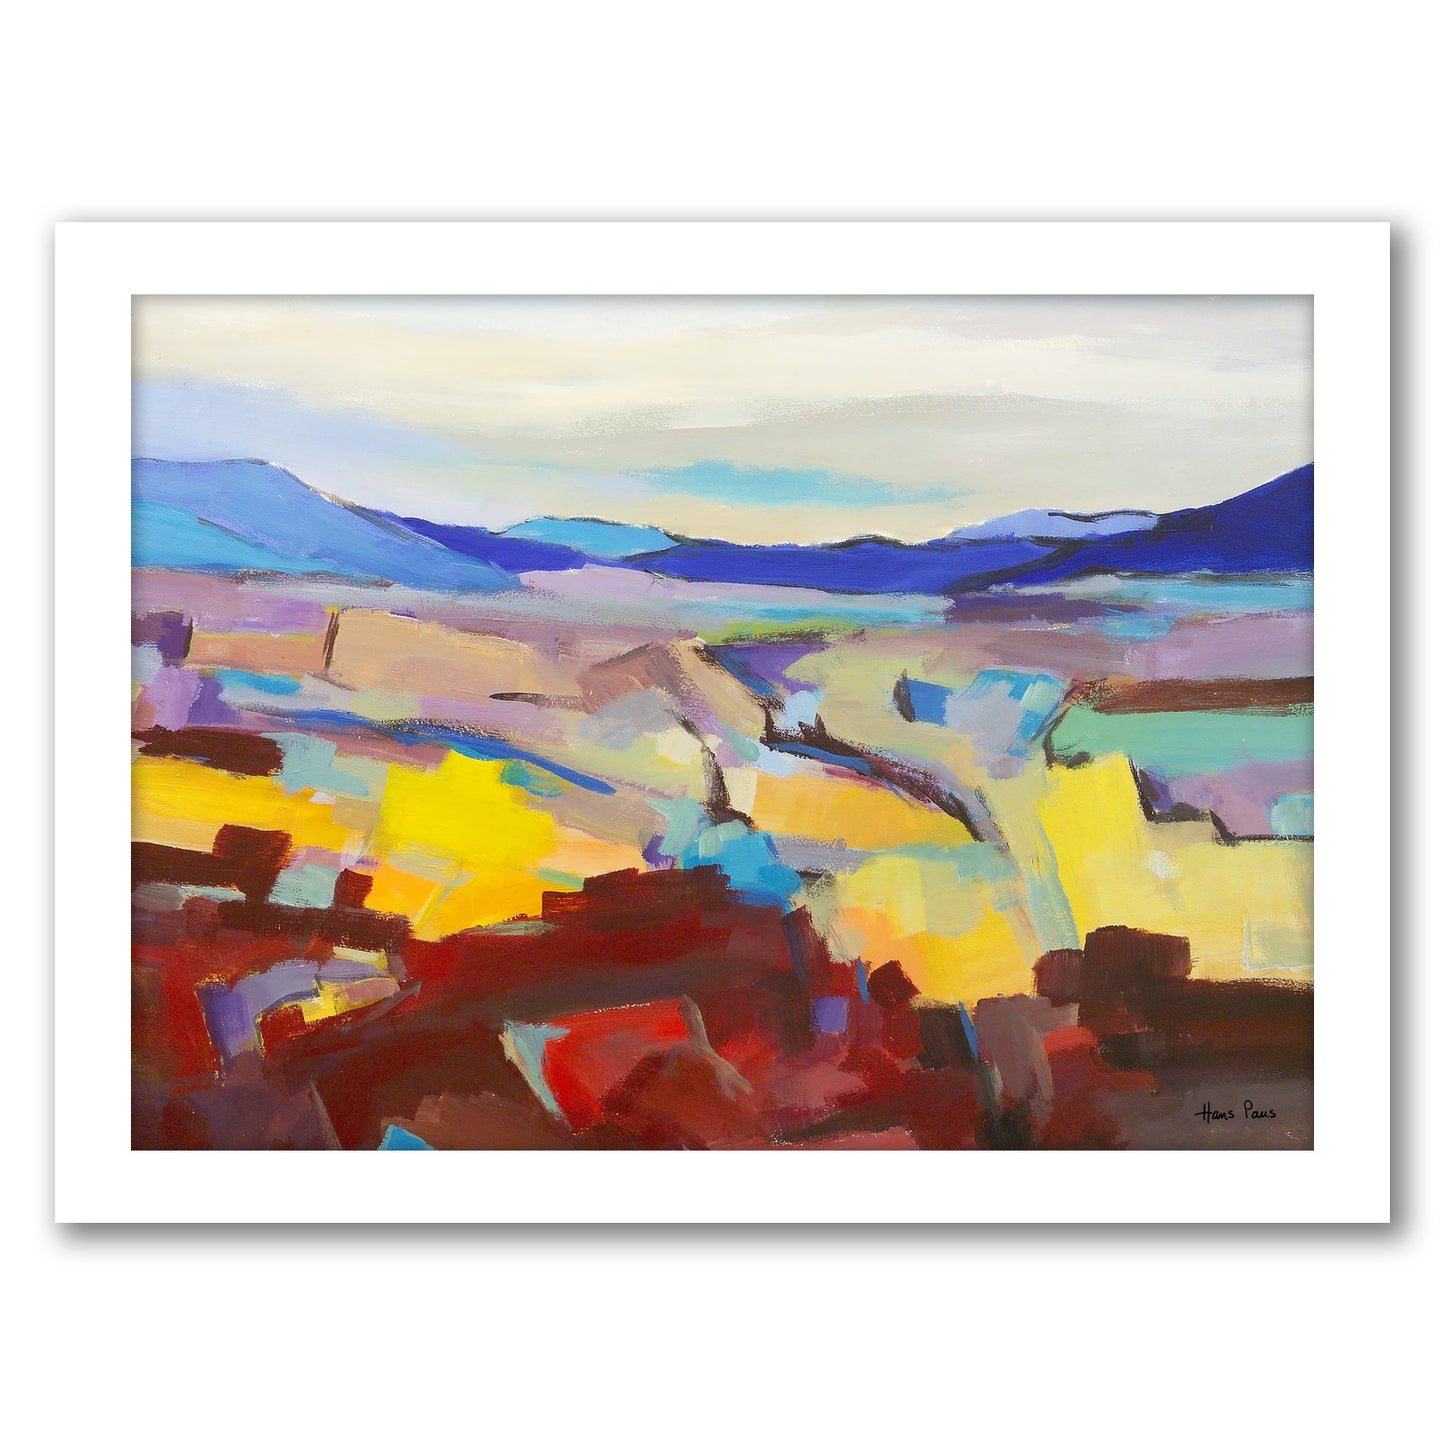 Abstract Landscape 4 By Hans Paus - Framed Print